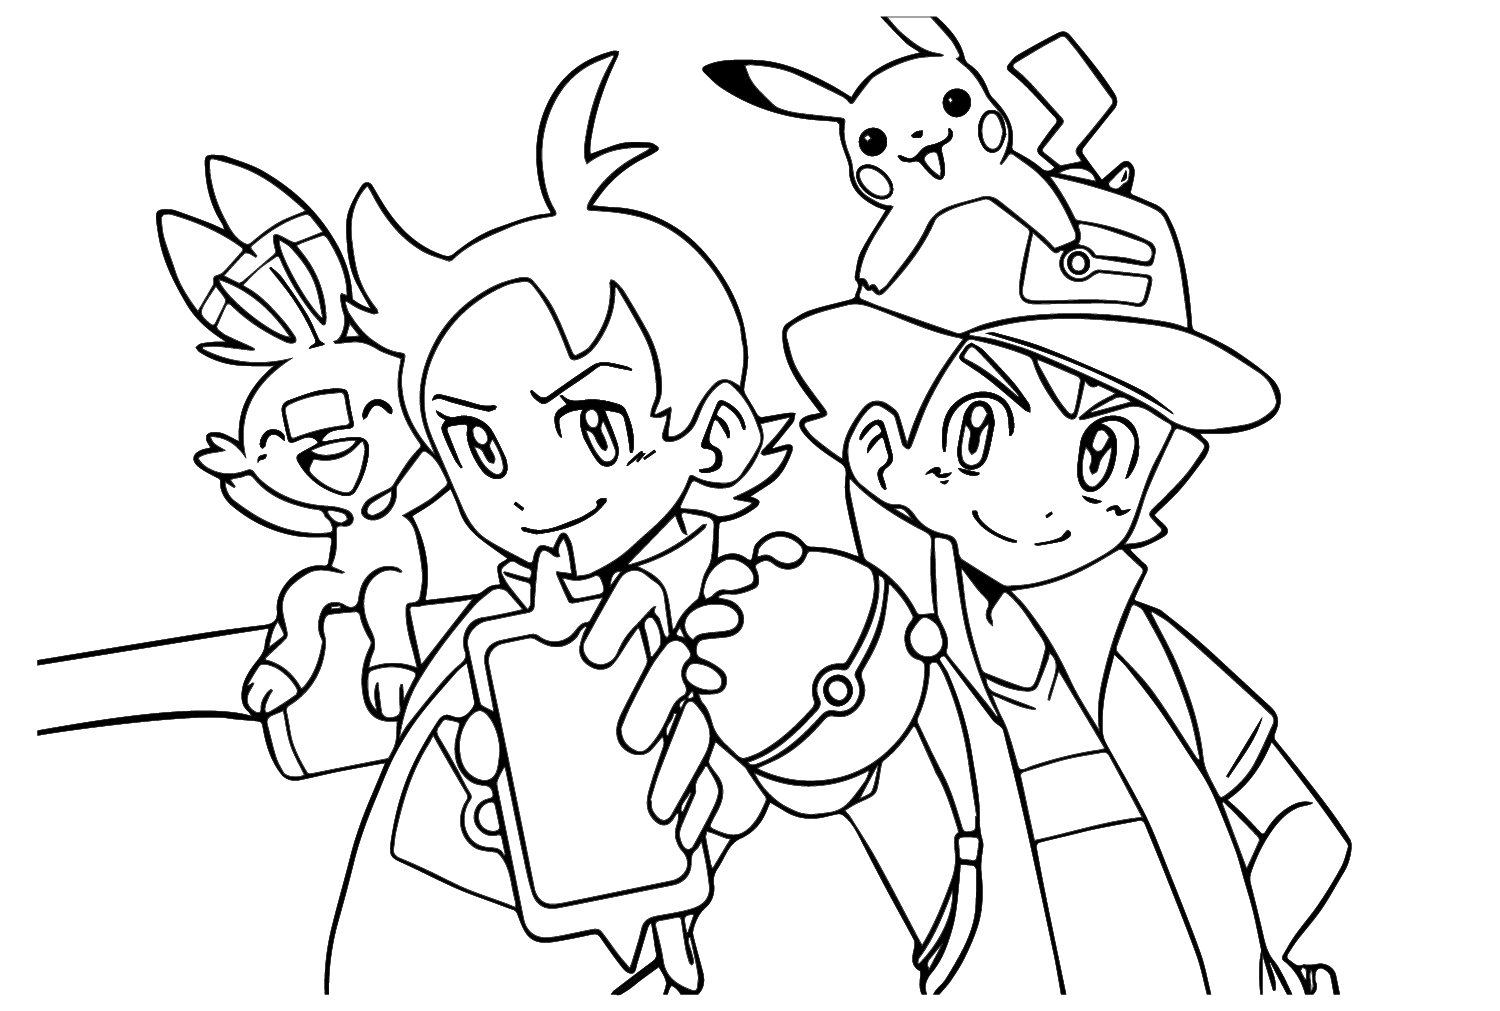 Ash, Goh Pokemon Pictures to Color from Ash Ketchum